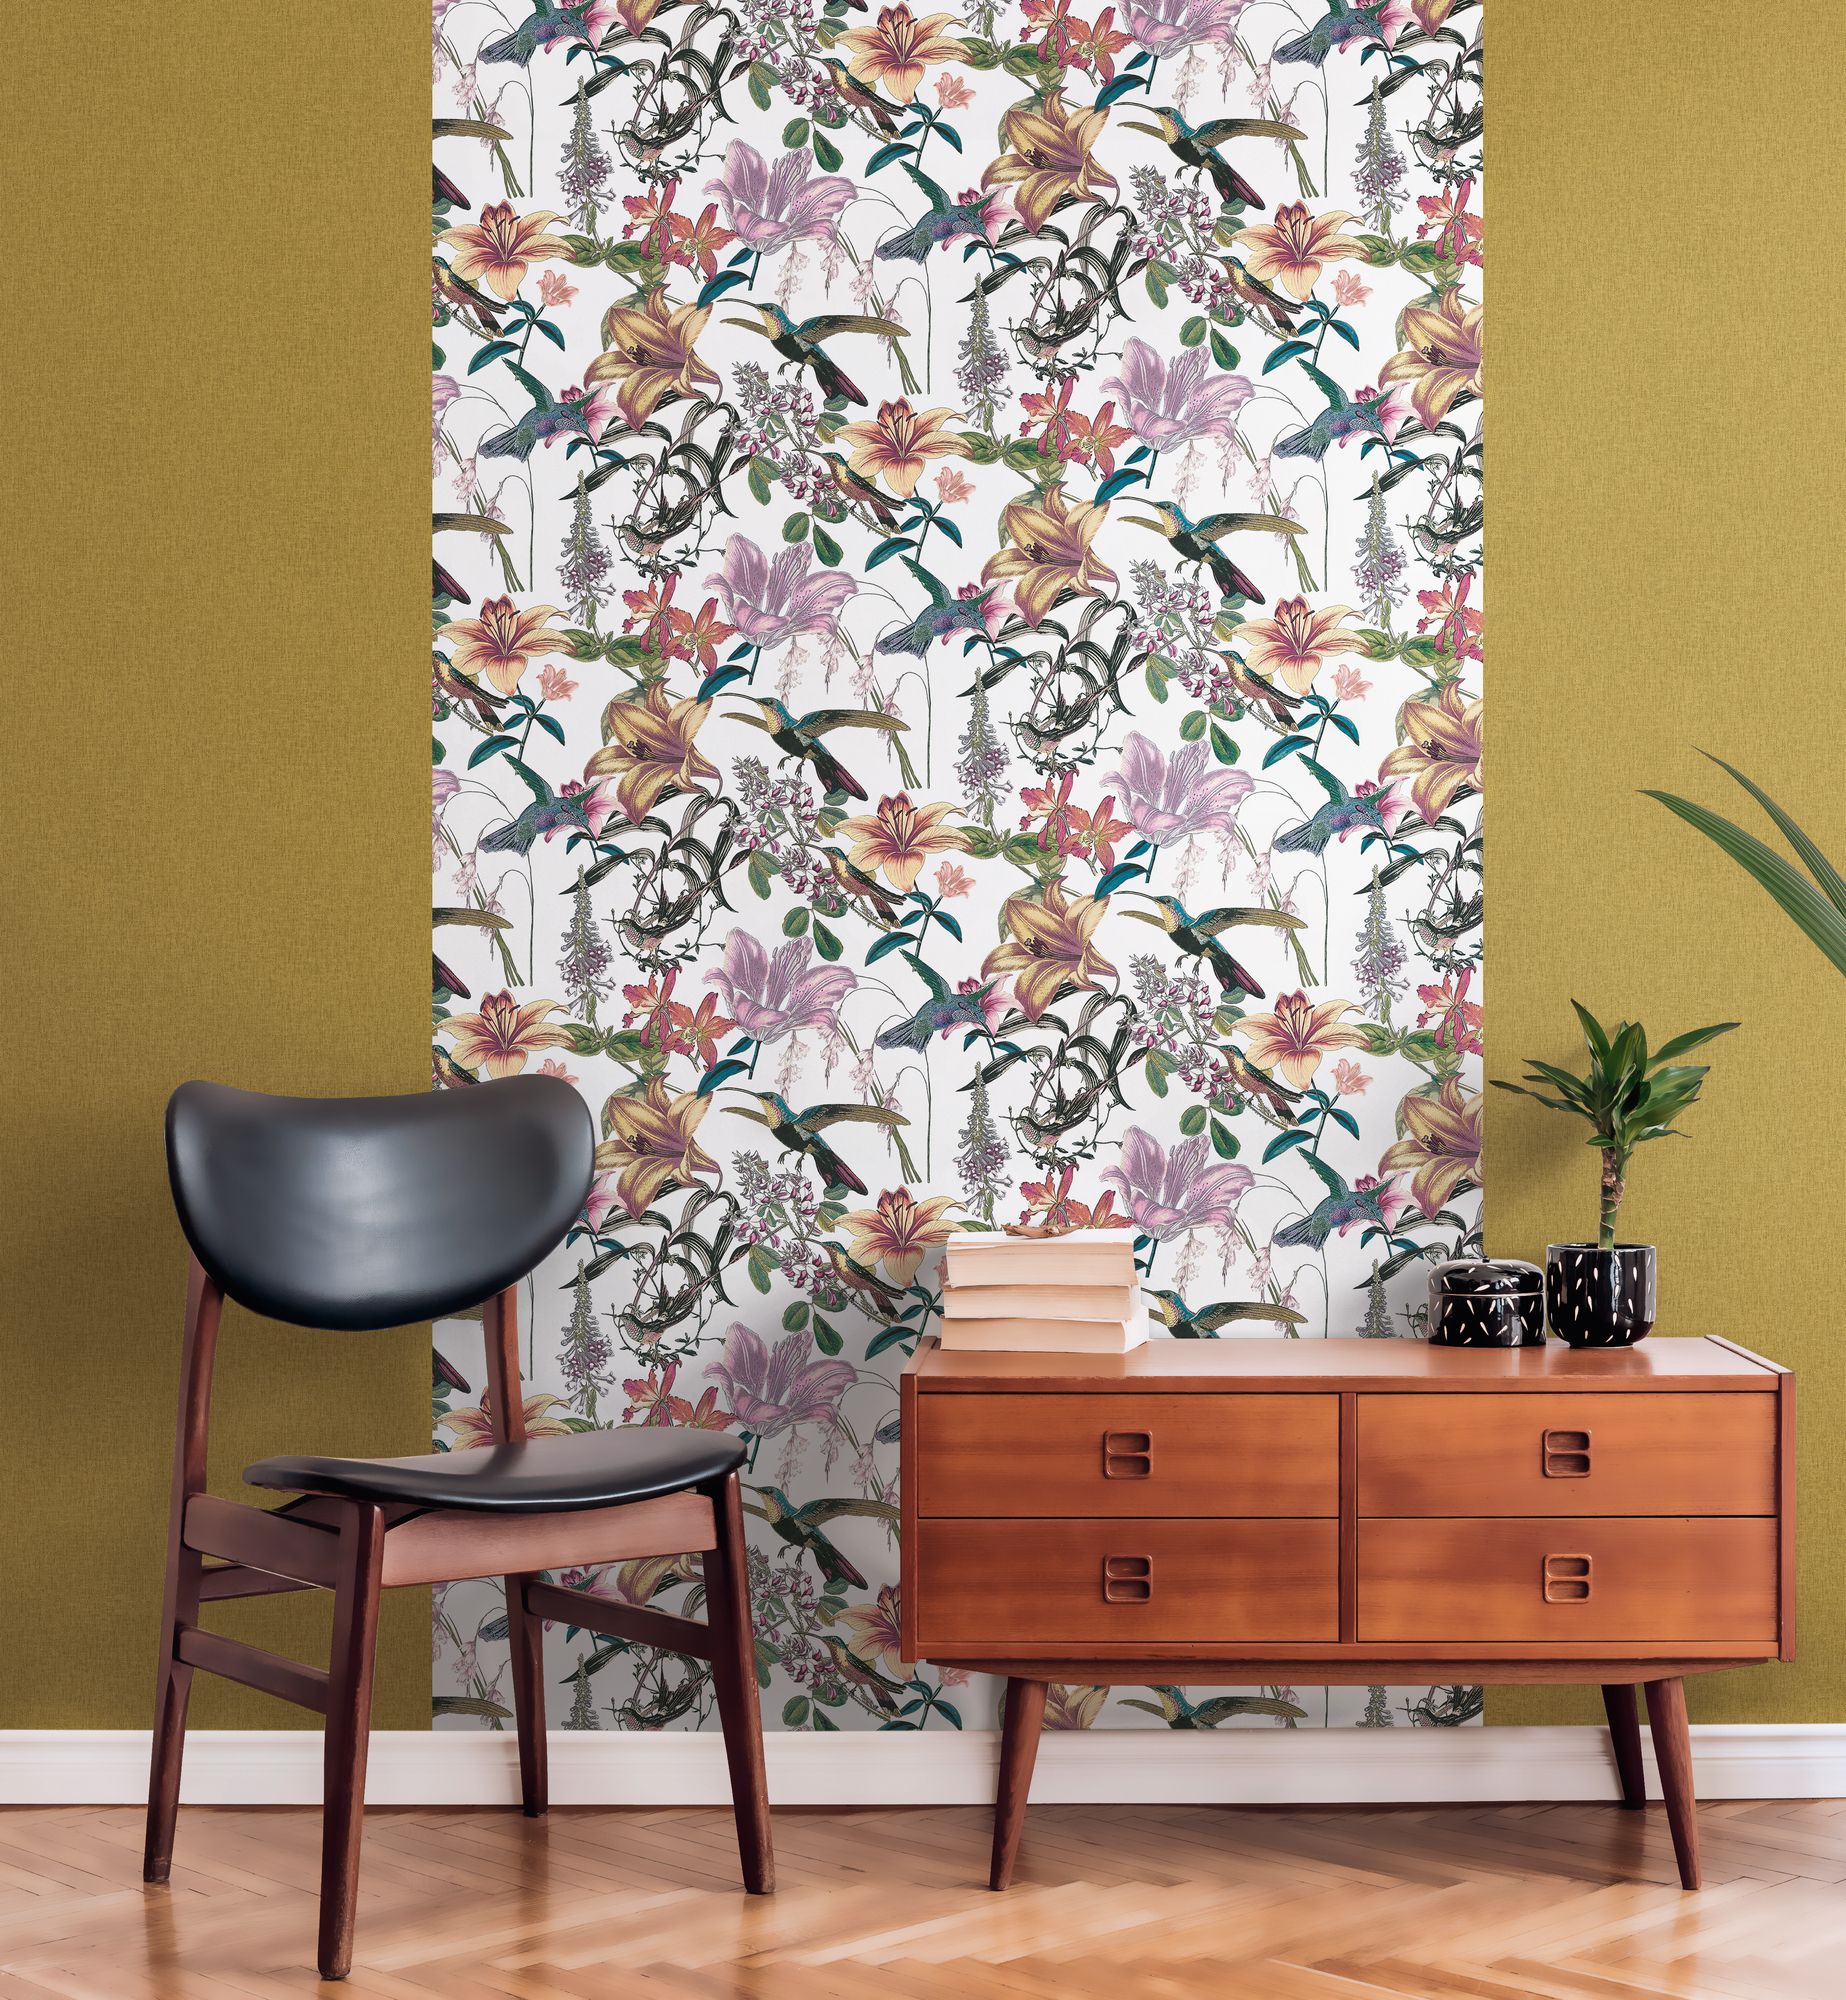 Architects Paper Jungle Chic, Florale Tapete, bunt, weiß 377011